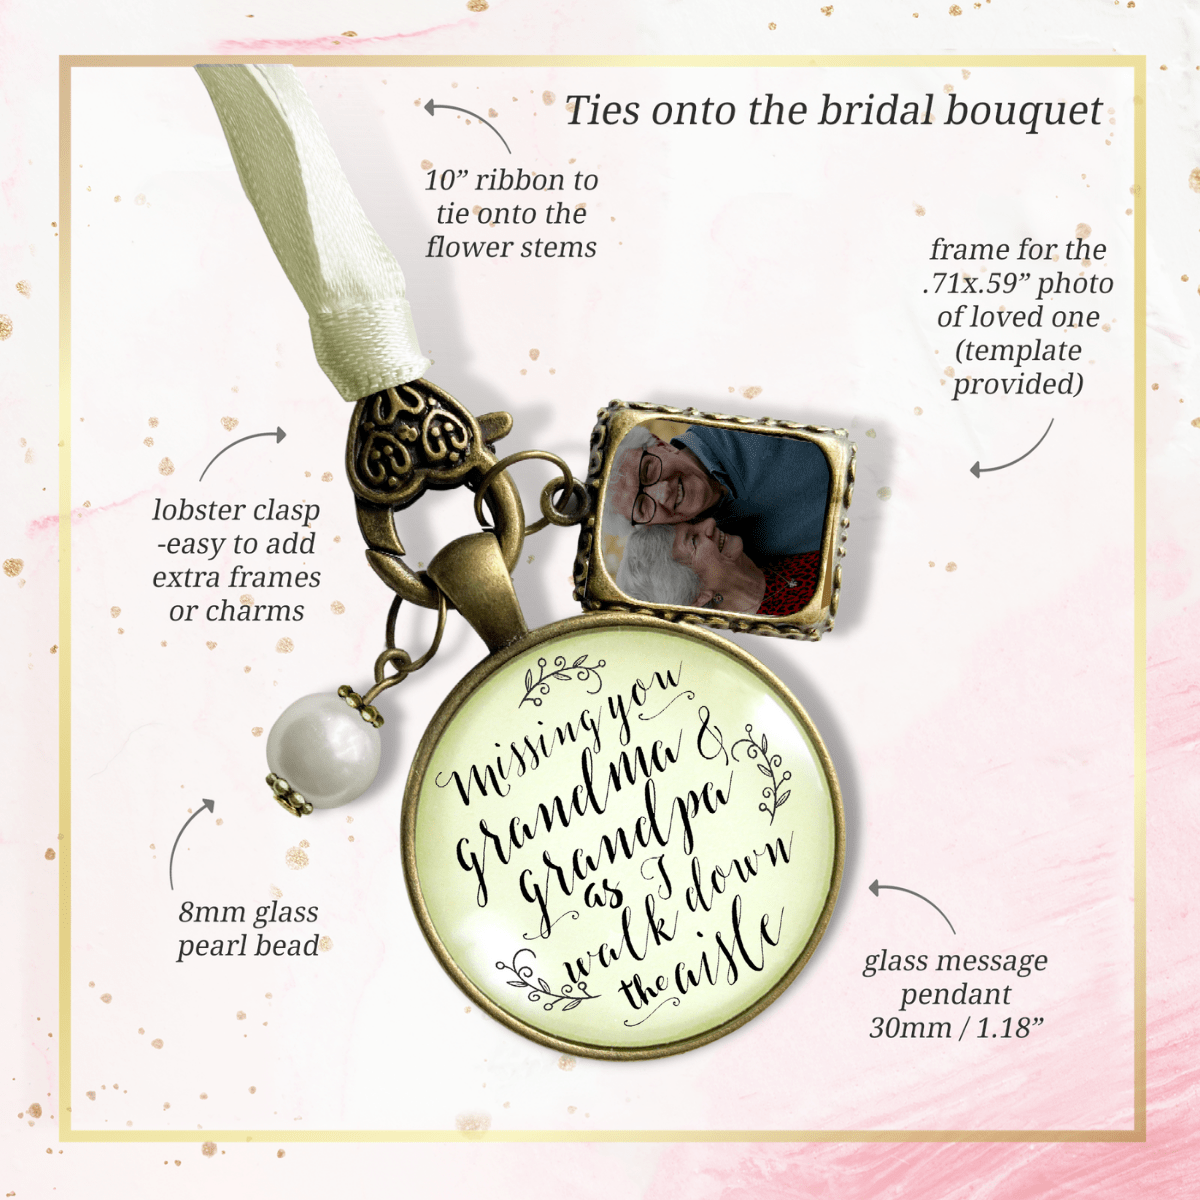 Bouquet Charm Bridal Memorial Grandma Grandpa Miss You Wedding 2 Picture Frames - Gutsy Goodness Handmade Jewelry Gifts